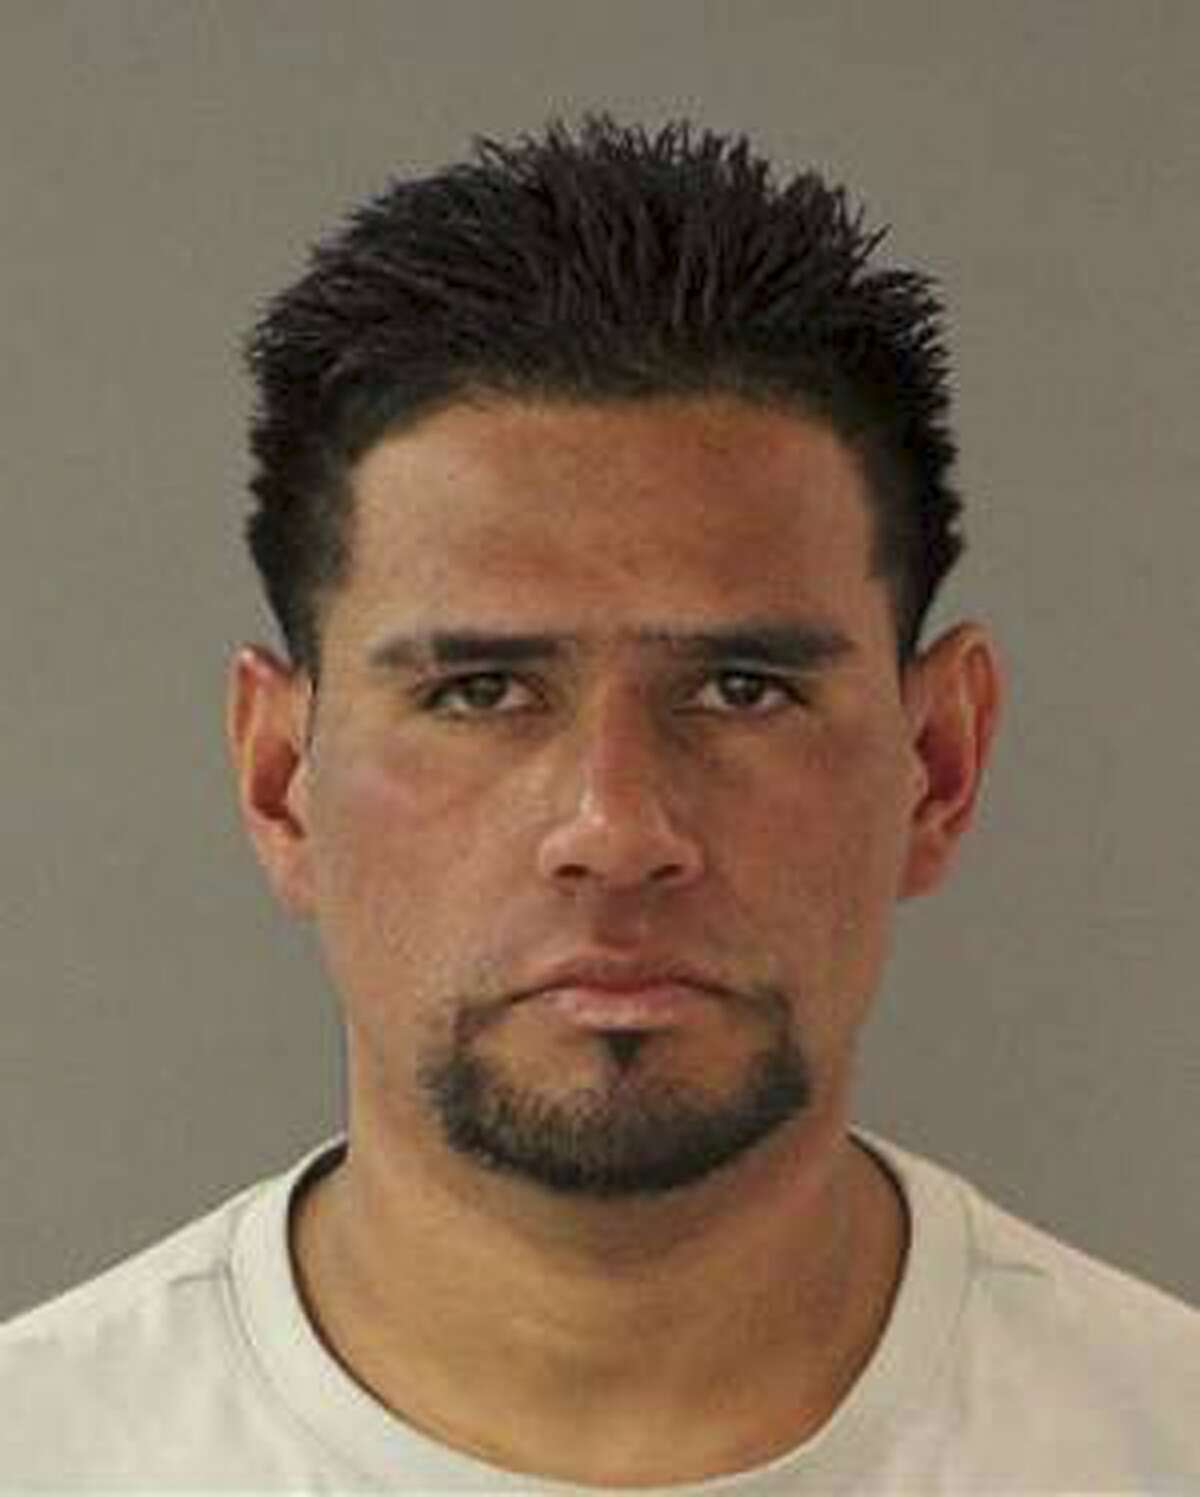 In this photo released March 12, 2019, by the San Jose Police Department, is Carlos Eduardo Arevalo Carranza. Authorities in Northern California are criticizing so-called sanctuary policies they say prevented federal authorities from detaining Carranza who is in the country illegally before he allegedly killed a woman inside her home. San Jose Police Chief Eddie Garcia says Carlos Eduardo Arevalo Carranza stalked Bambi Larson's neighborhood before allegedly beating and stabbing her to death. Garcia says Immigration and Customs Enforcement had previously asked to take custody of him six times, four times in Santa Clara County and two times in Los Angeles County. (San Jose Police Department via AP)